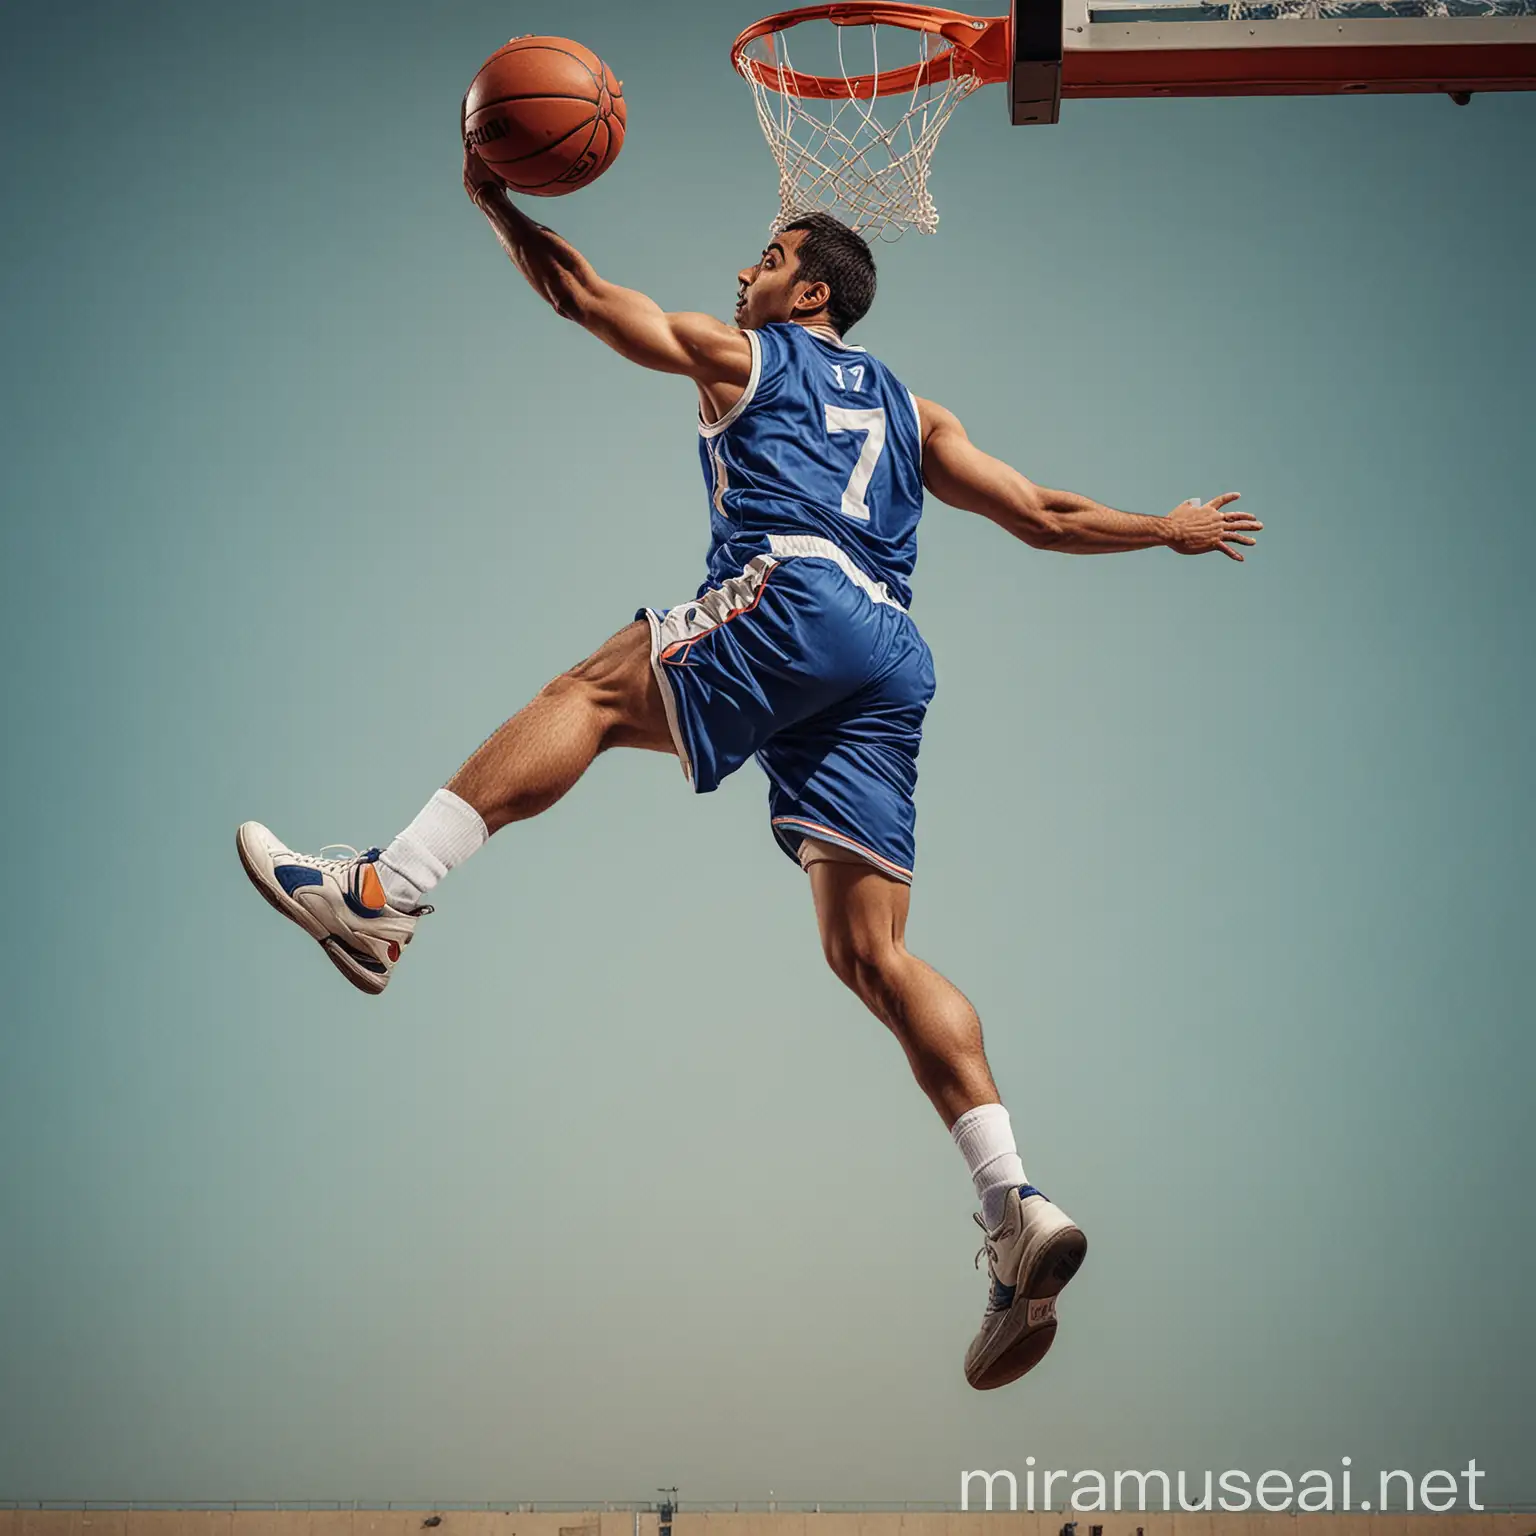 Dynamic Slam Dunk Action Basketball Player GHOSN Soars in Blue Jersey